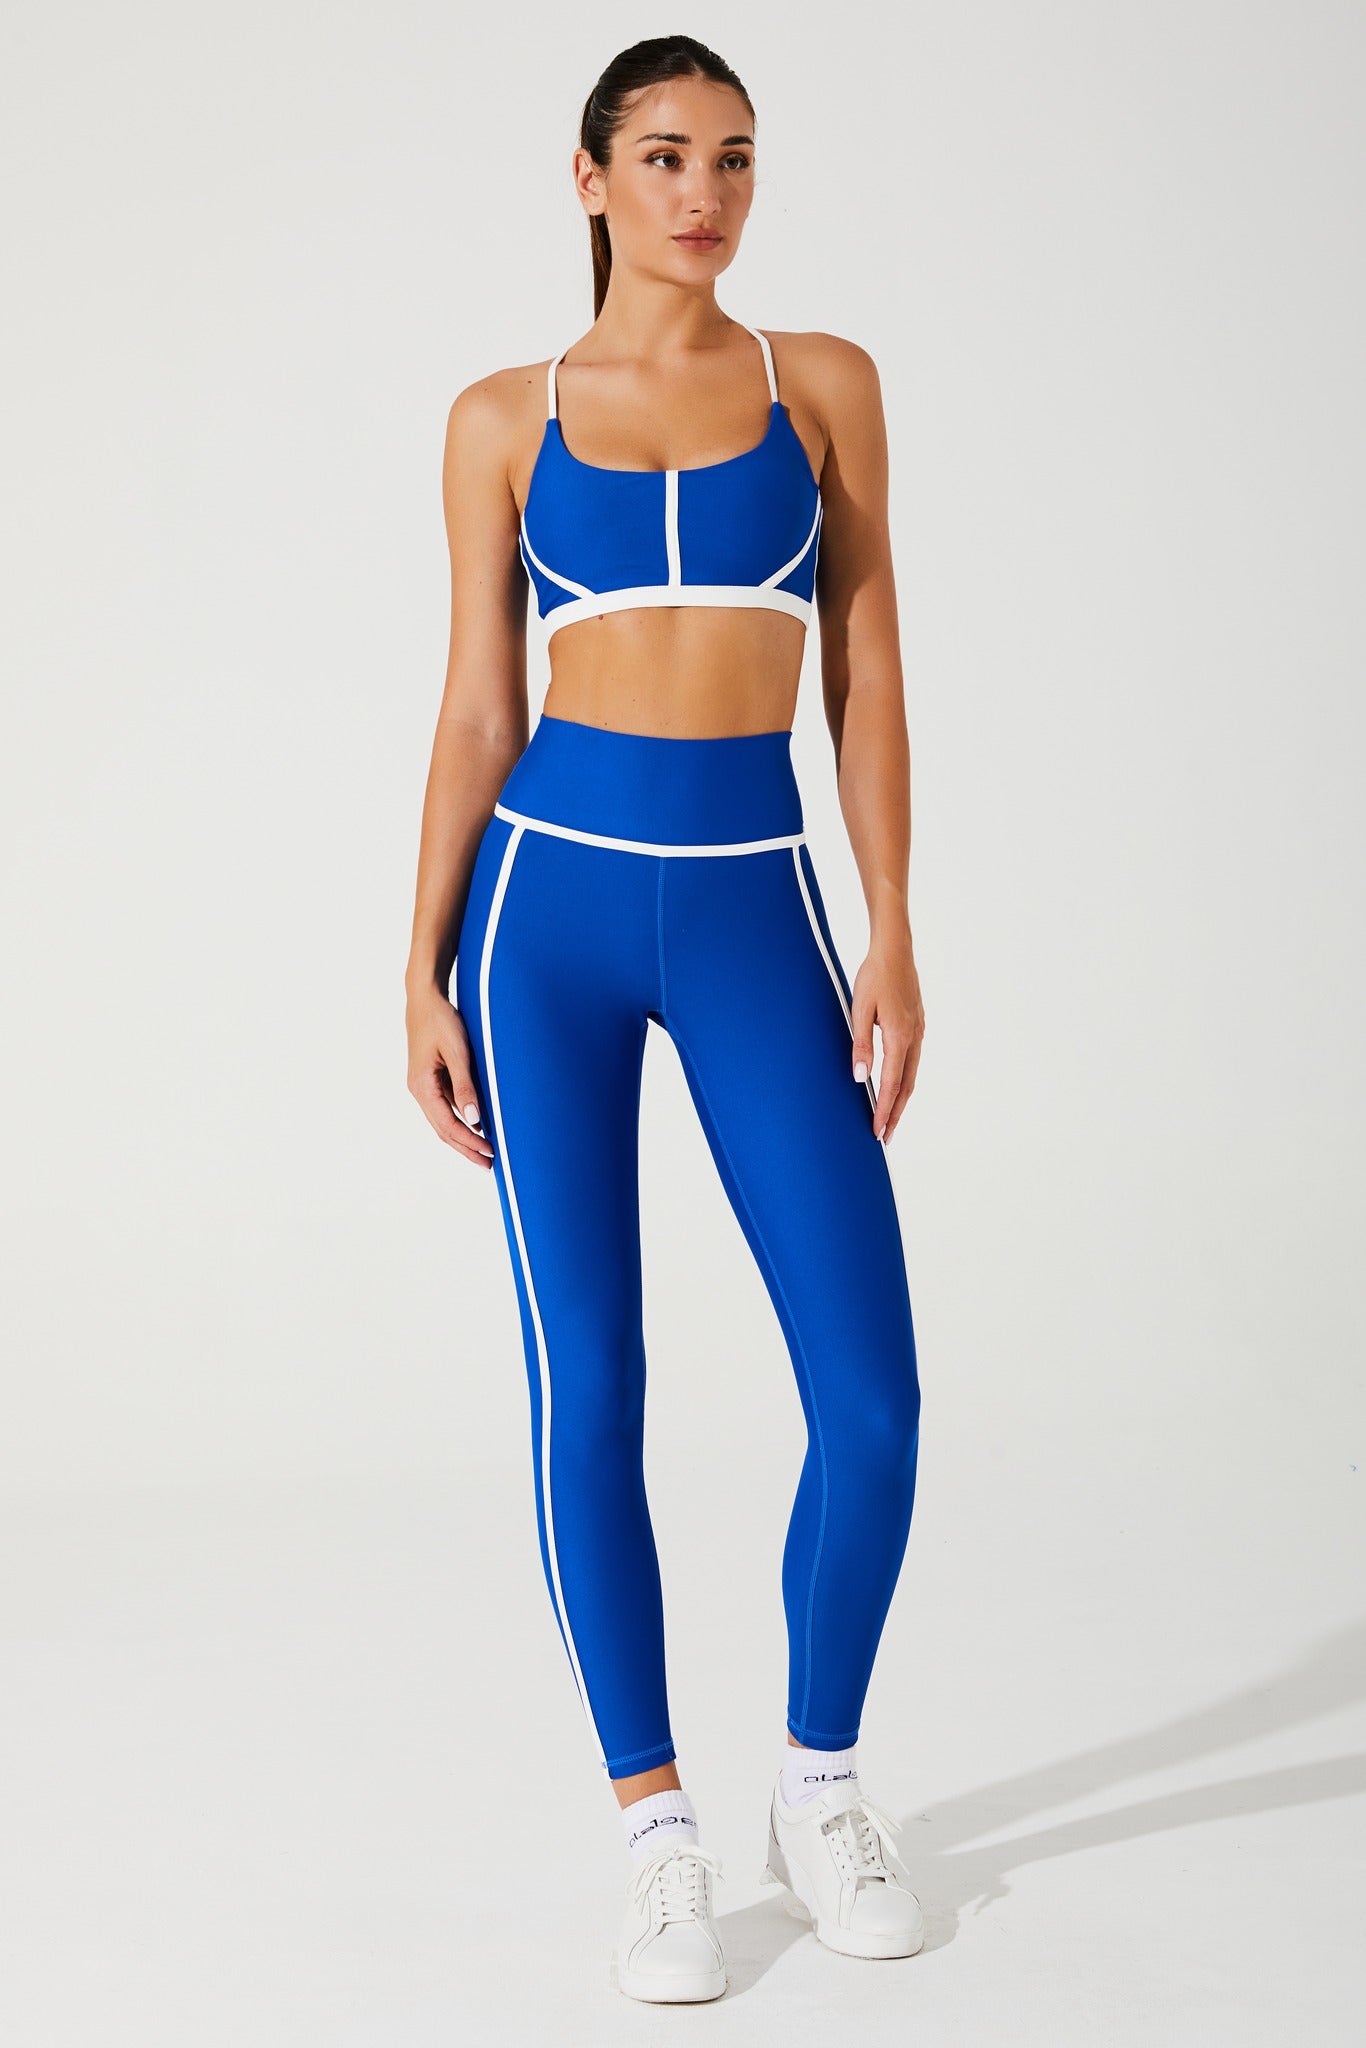 Stylish Atlantis Blue women's leggings with a ludic design, perfect for a fashionable look.